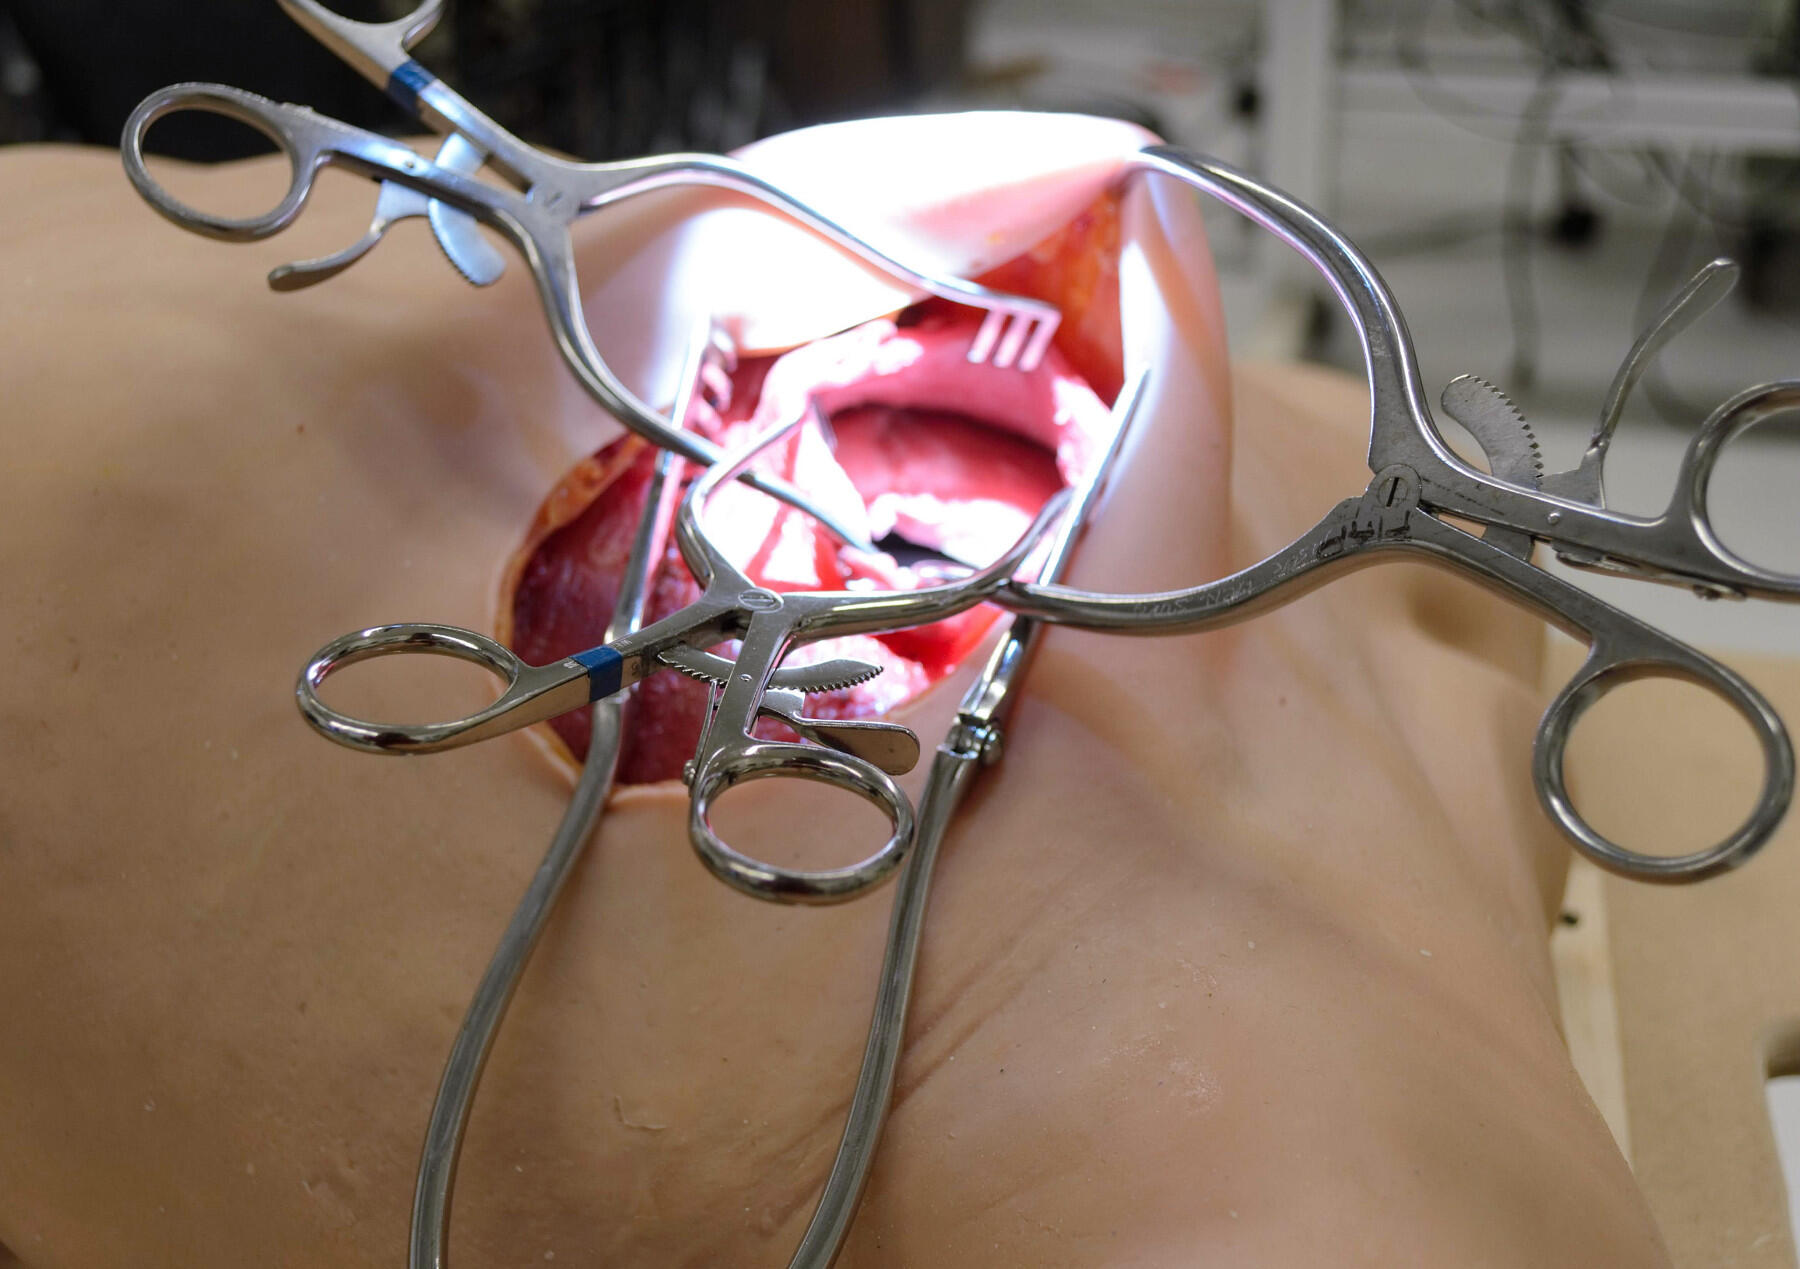 Simulated chest cavity within the Advanced Microsurgery Trainer.